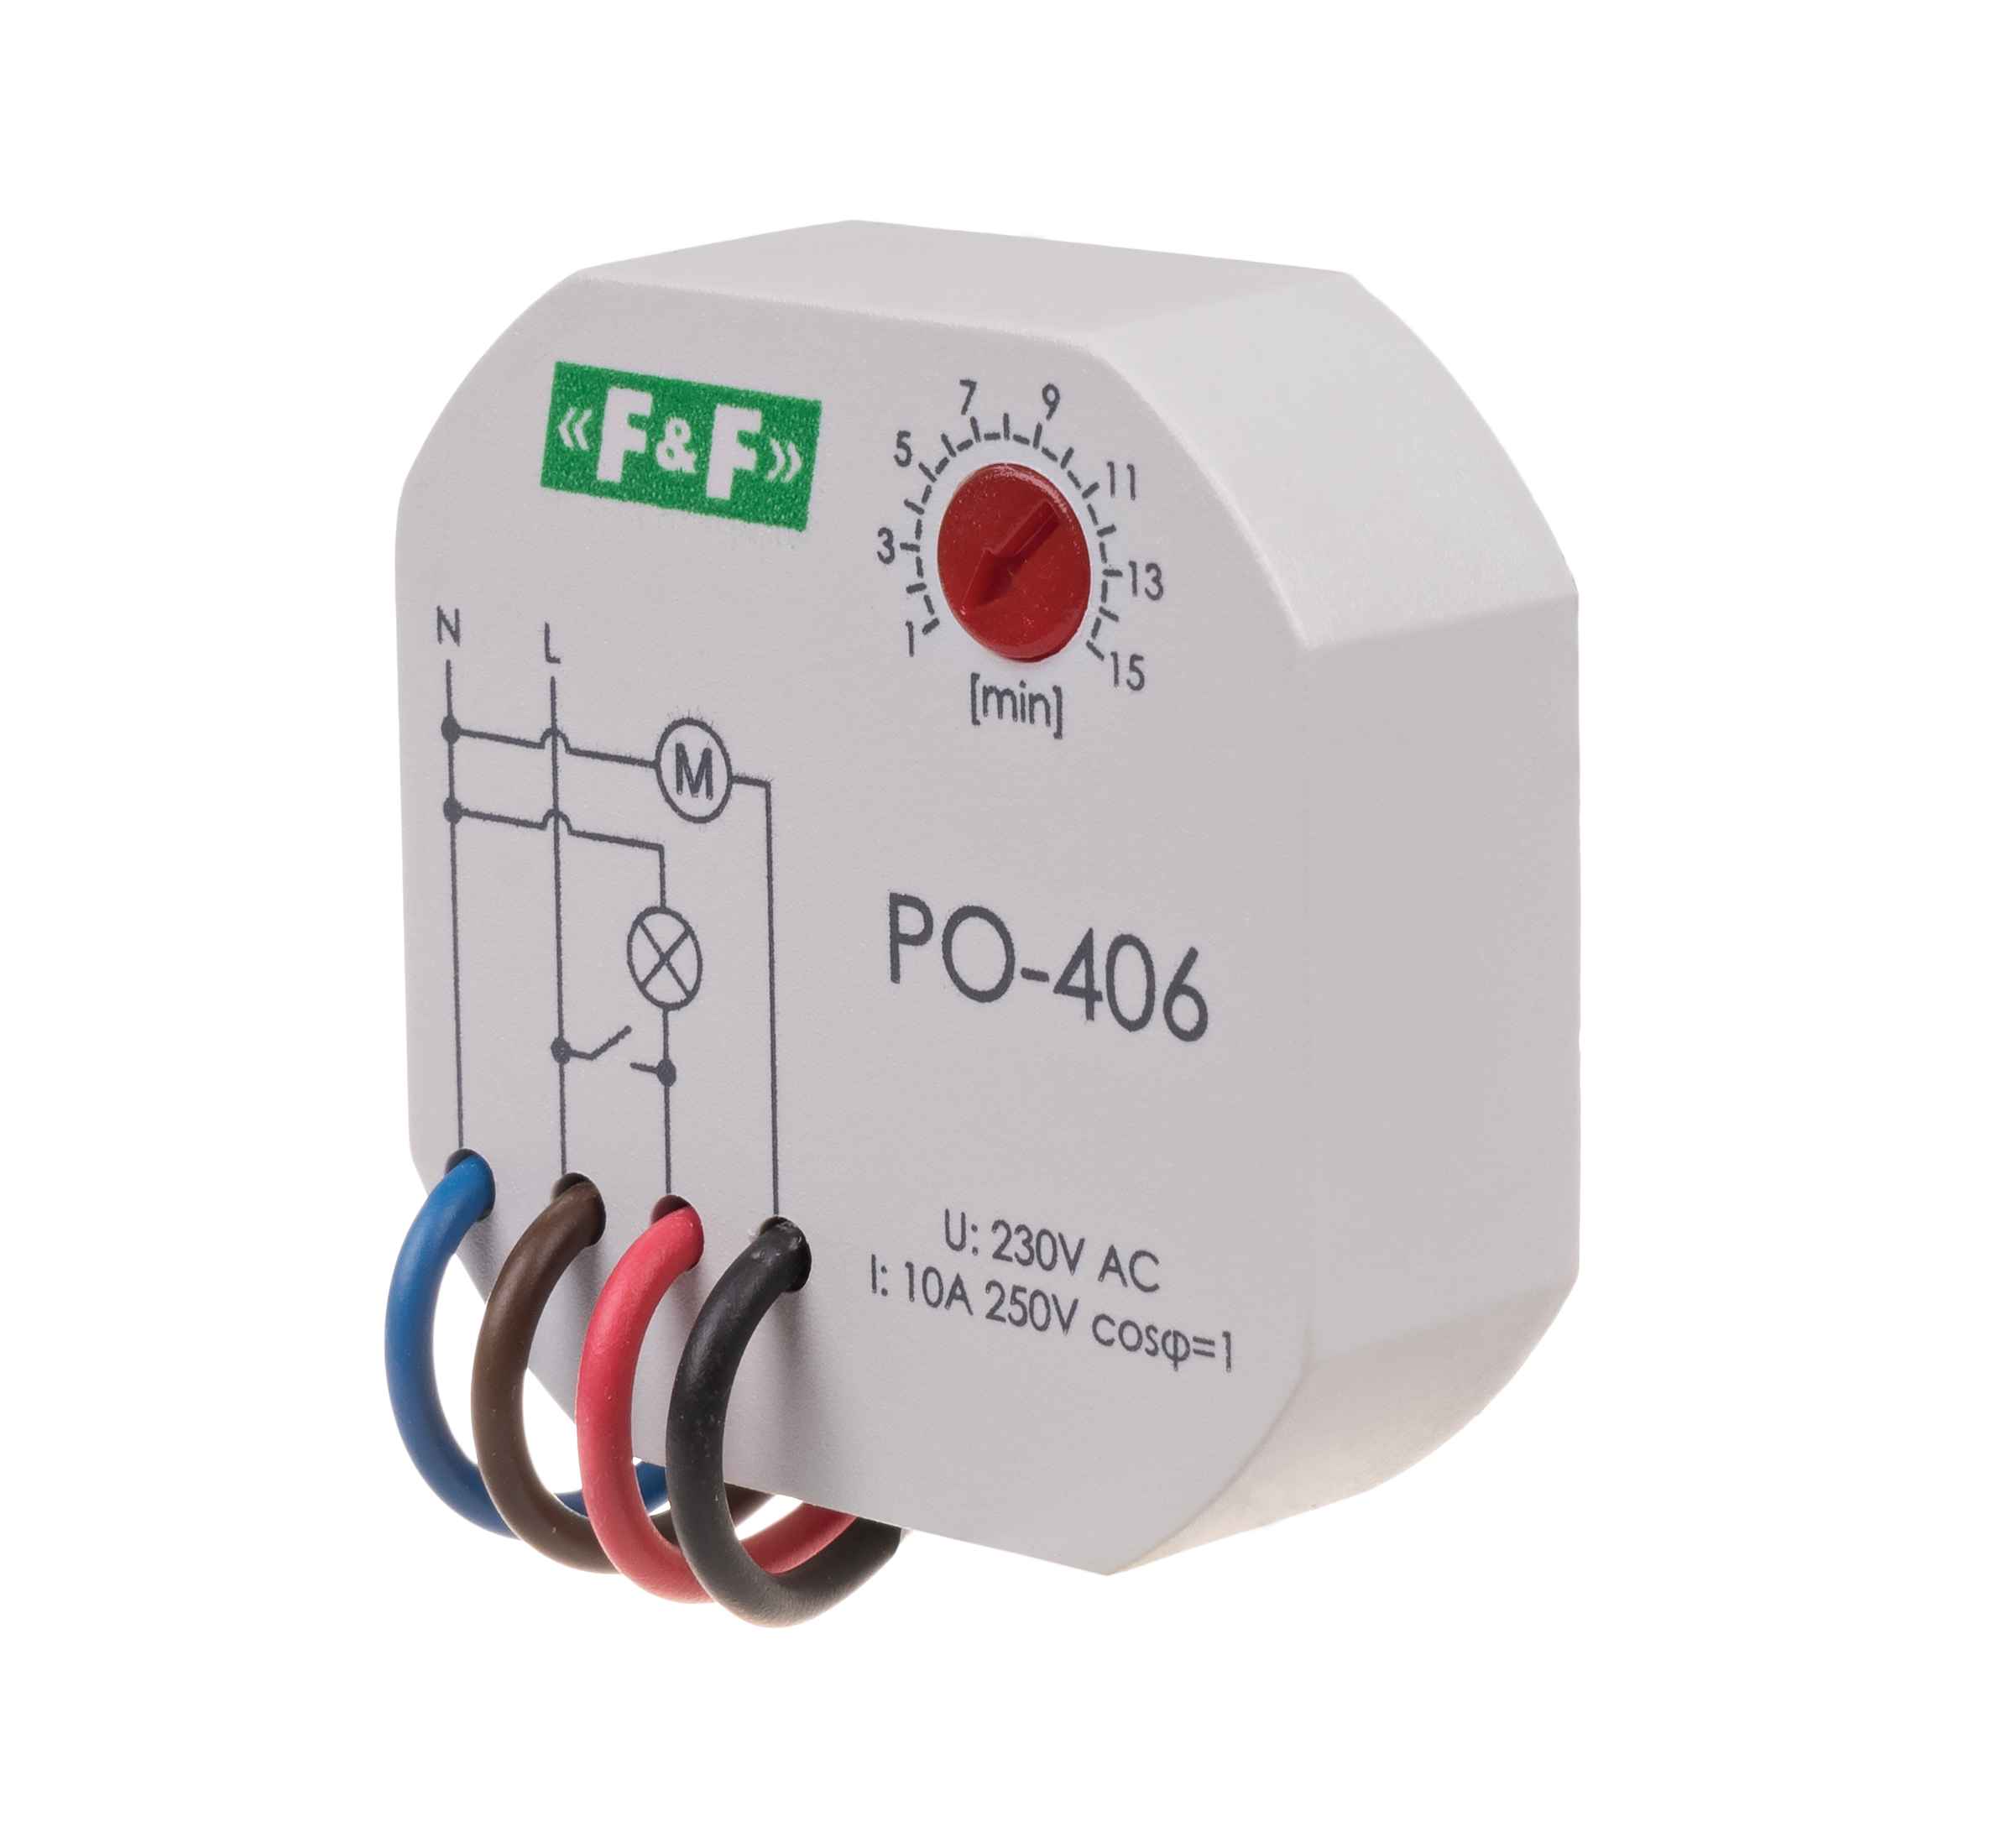 PO-406 timing relay